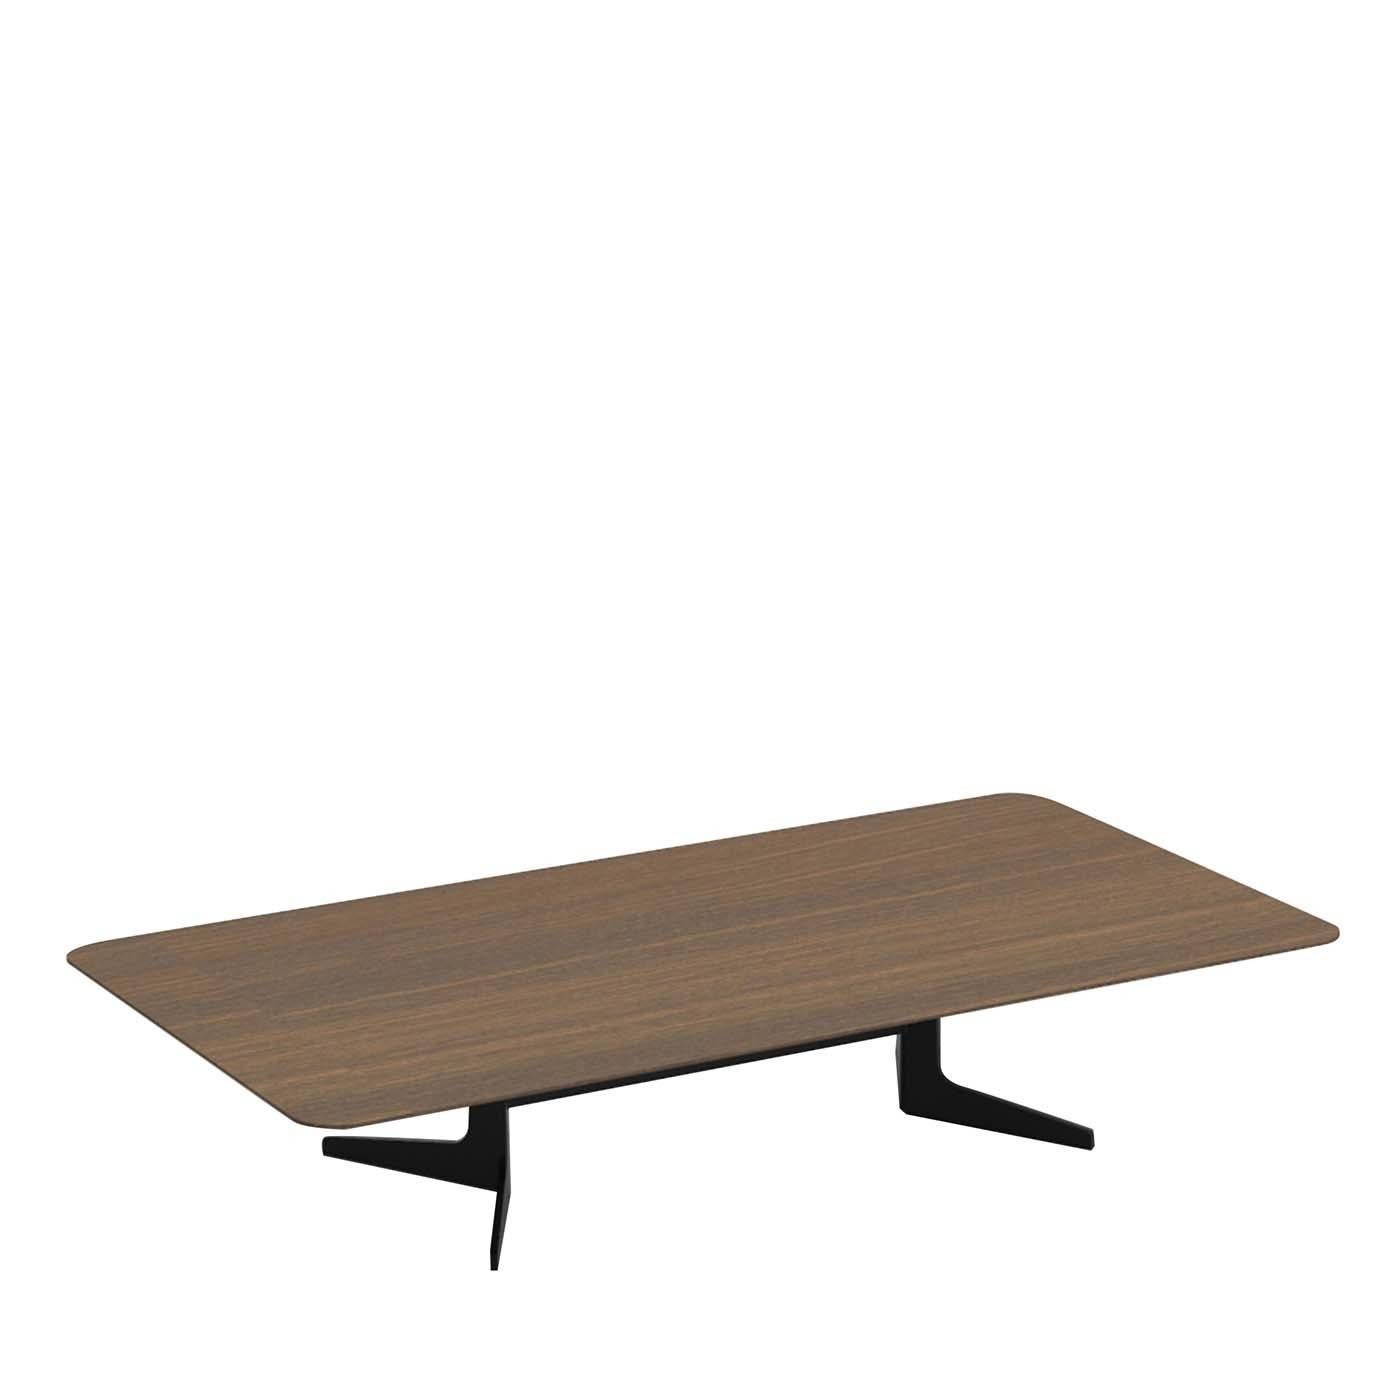 A striking example of exquisite craftsmanship and simple, timeless allure, this coffee table boasts an elegant clean design. The top in smoked brown oakwood adds a refined surface that will adorn any interior with sophistication. The metal base